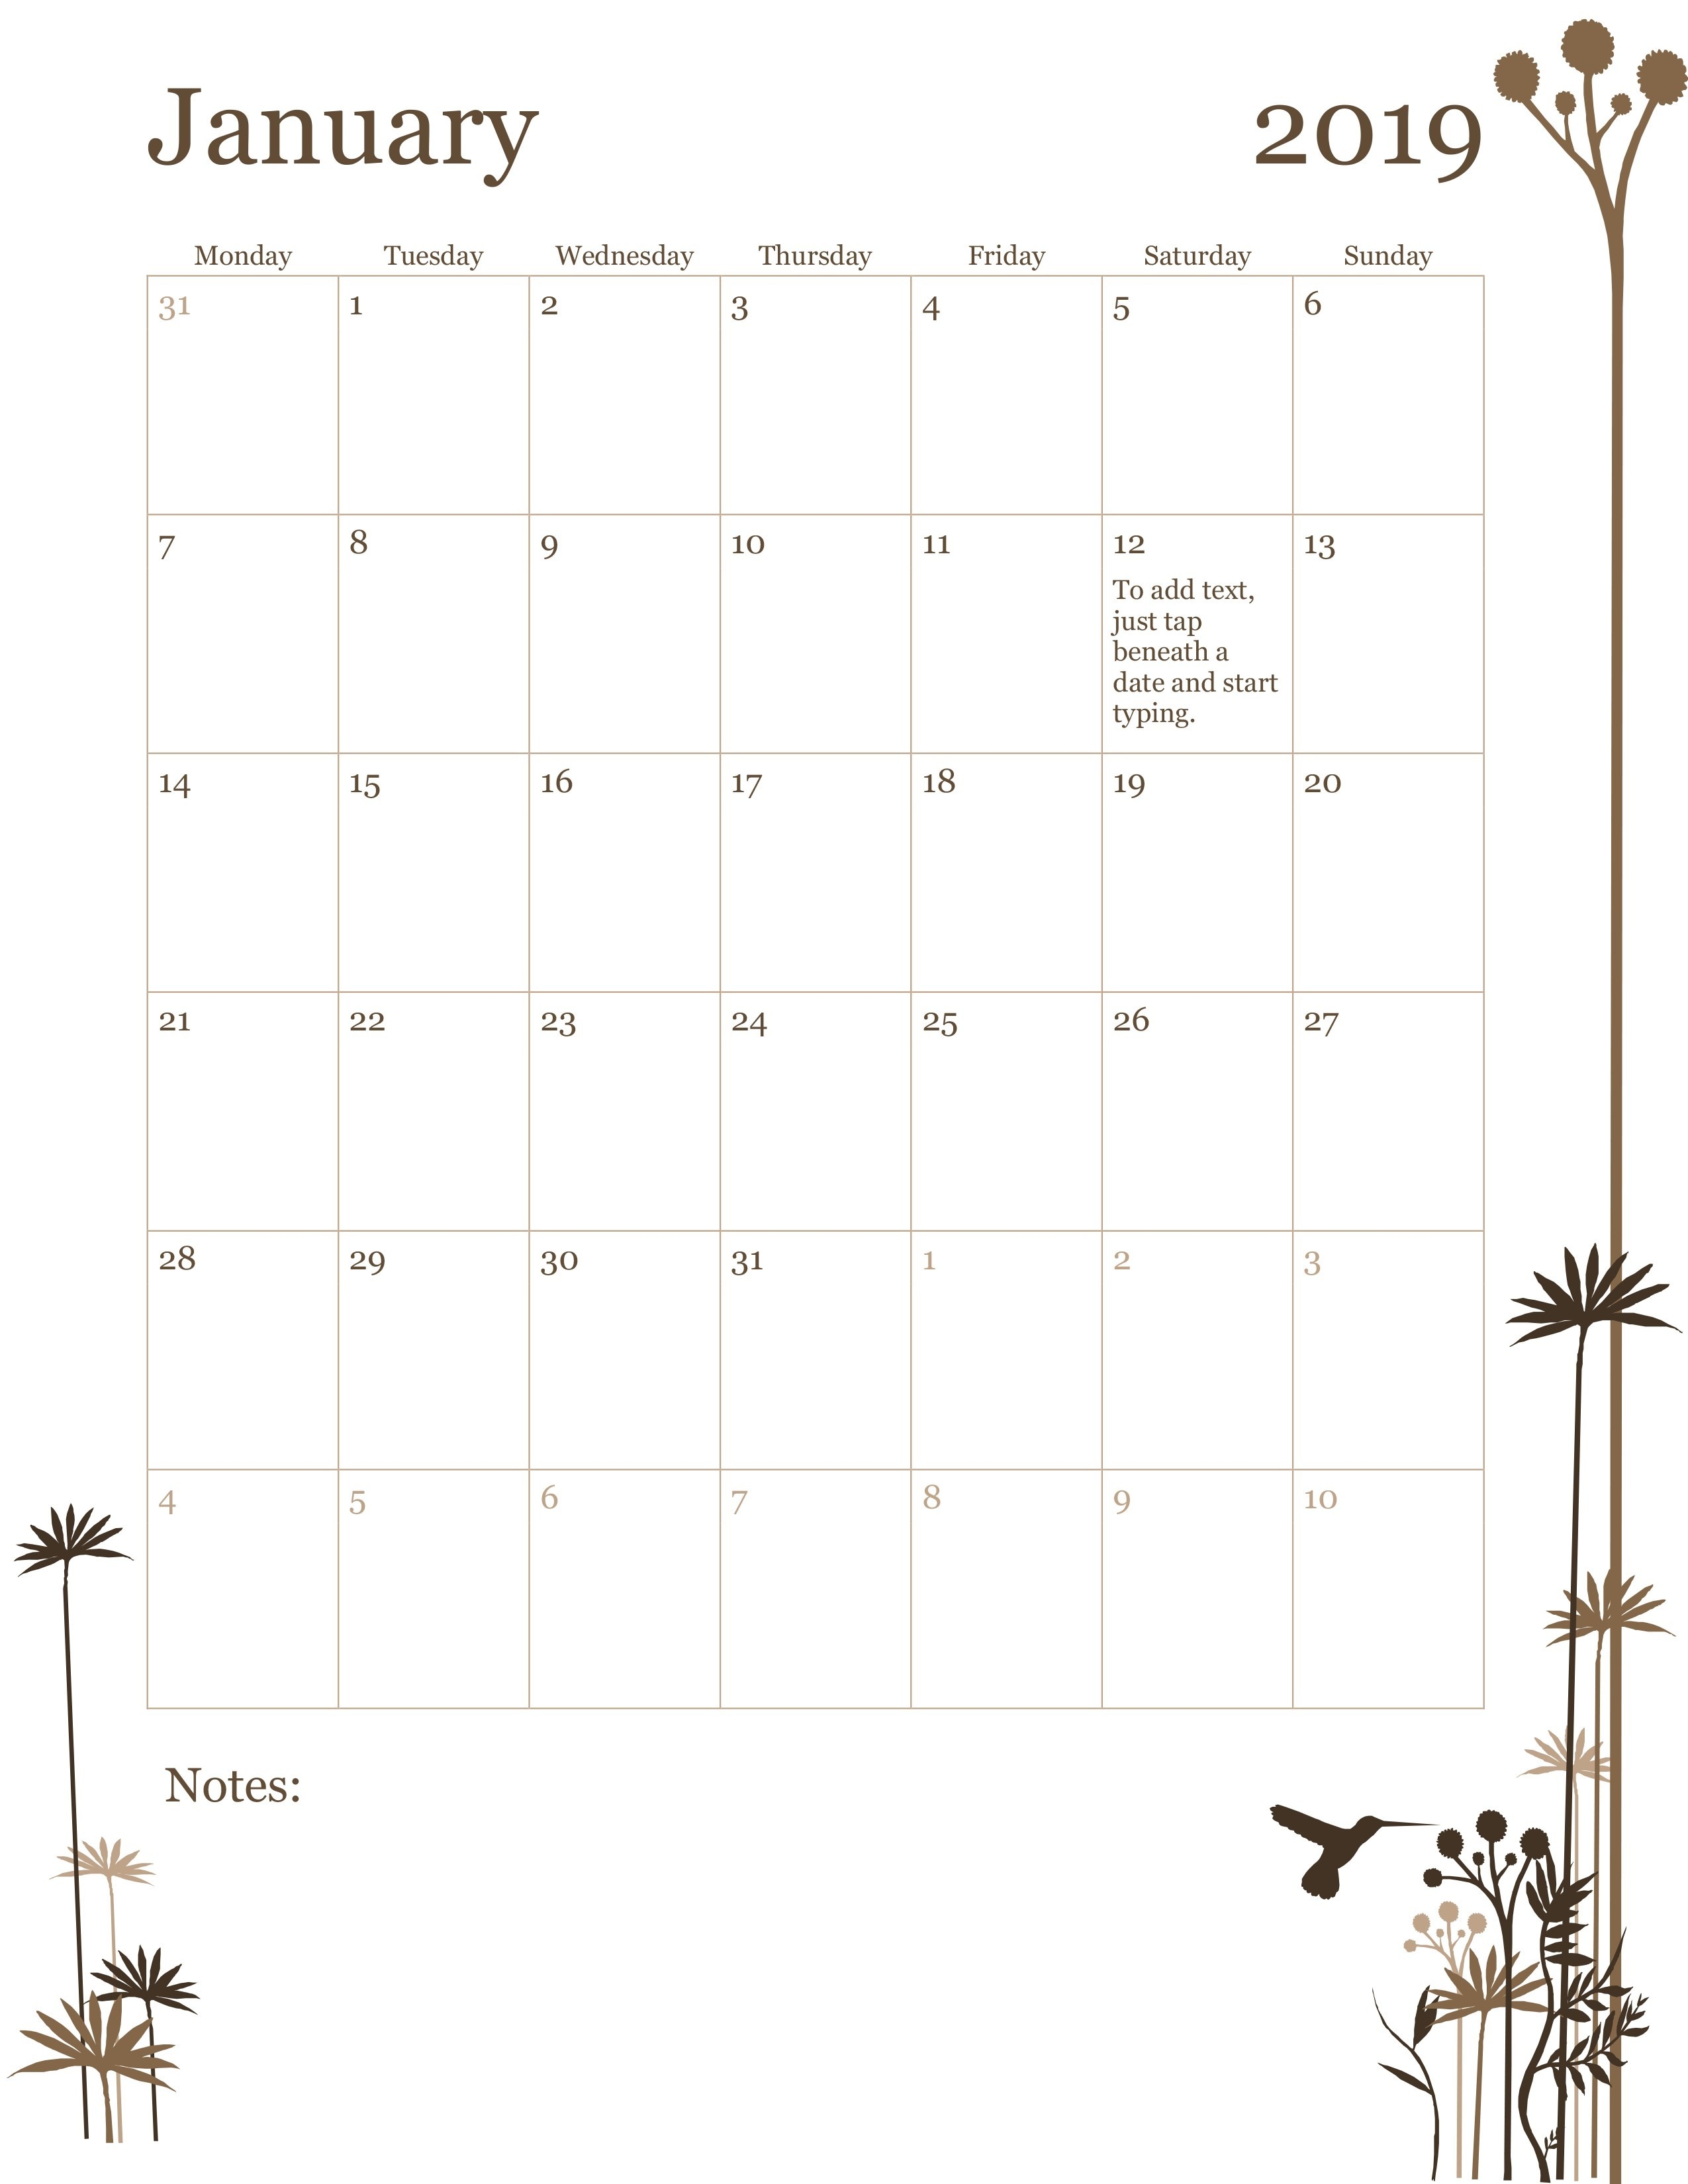 Calendars - Office-12 Months To View Monthly Calendar